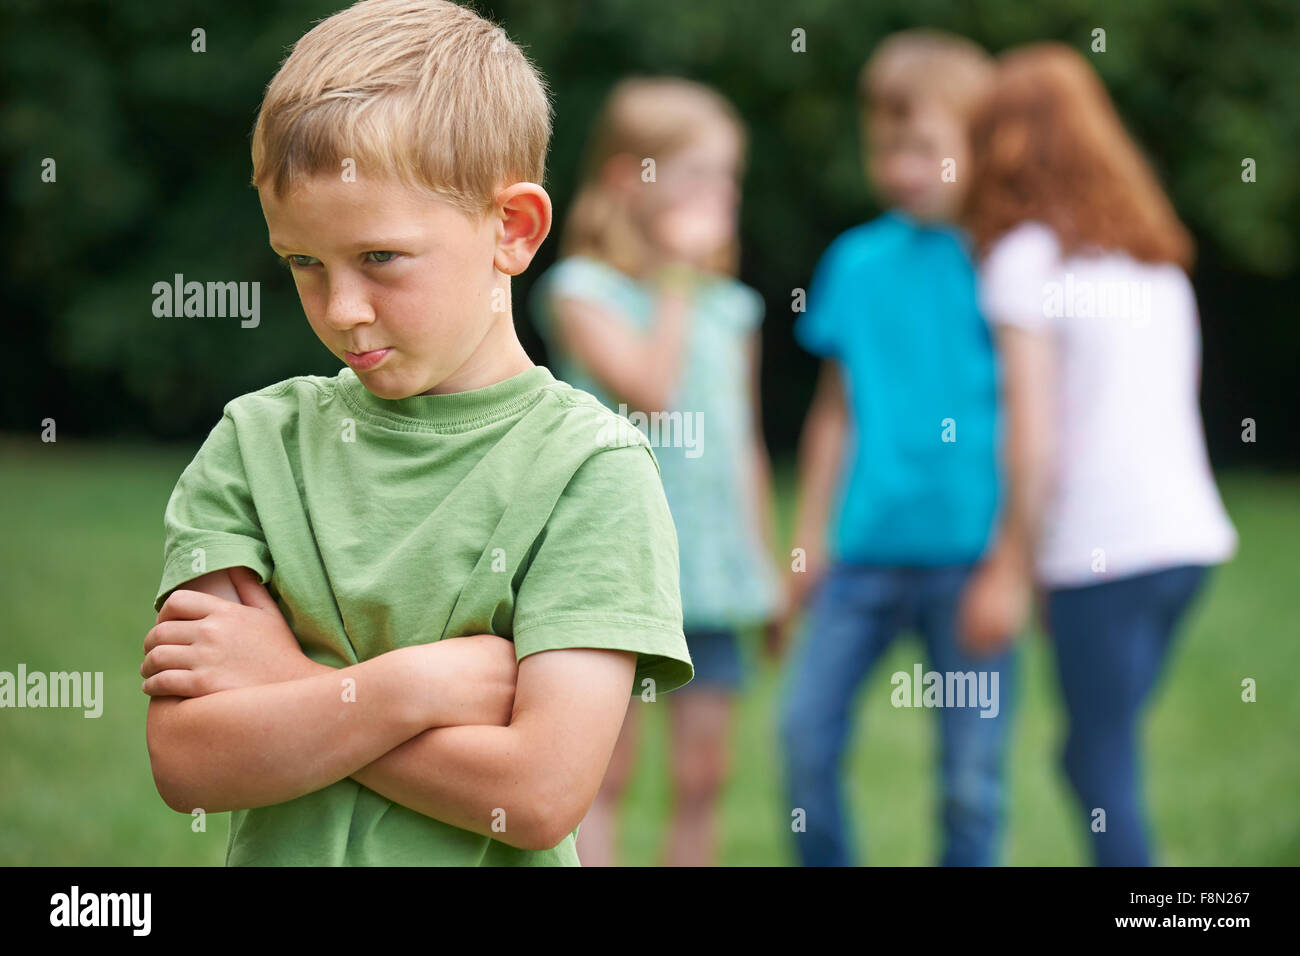 Unhappy Boy Being Gossiped About By Other Children Stock Photo